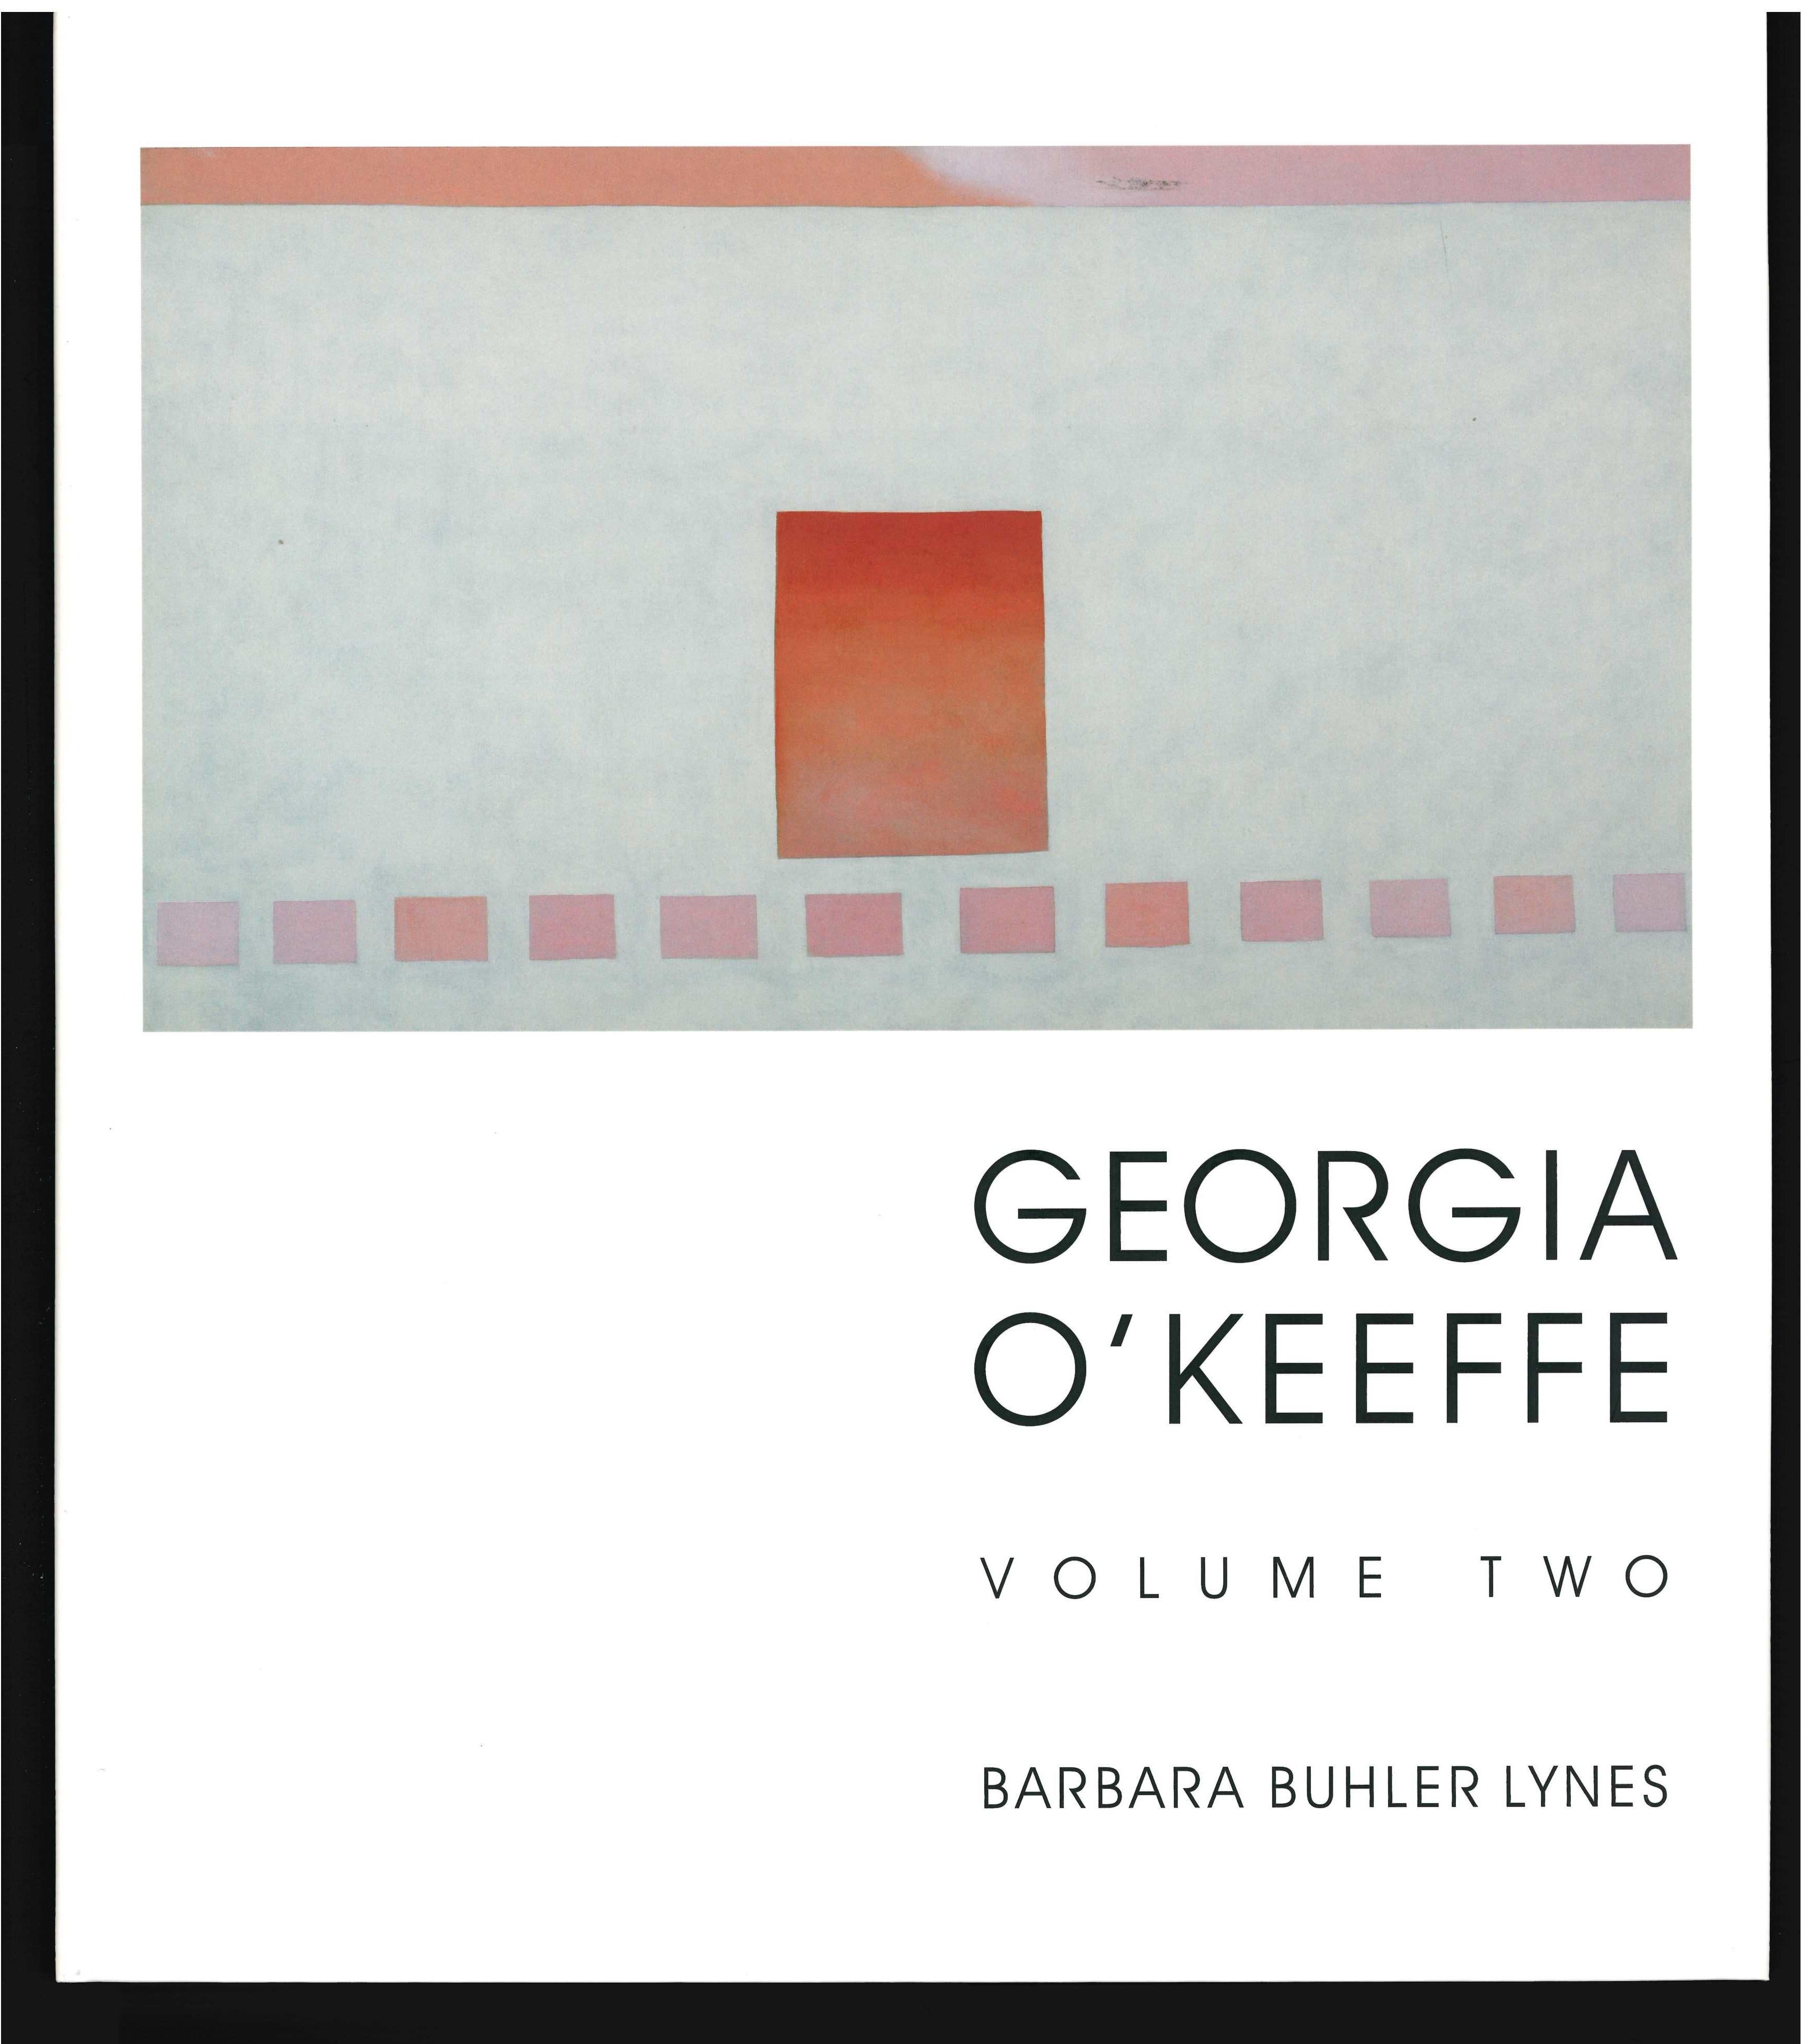 Georgia O'Keeffe: Catalogue Raisonne by Barbara Buhler Lynes (Books) In Good Condition For Sale In North Yorkshire, GB